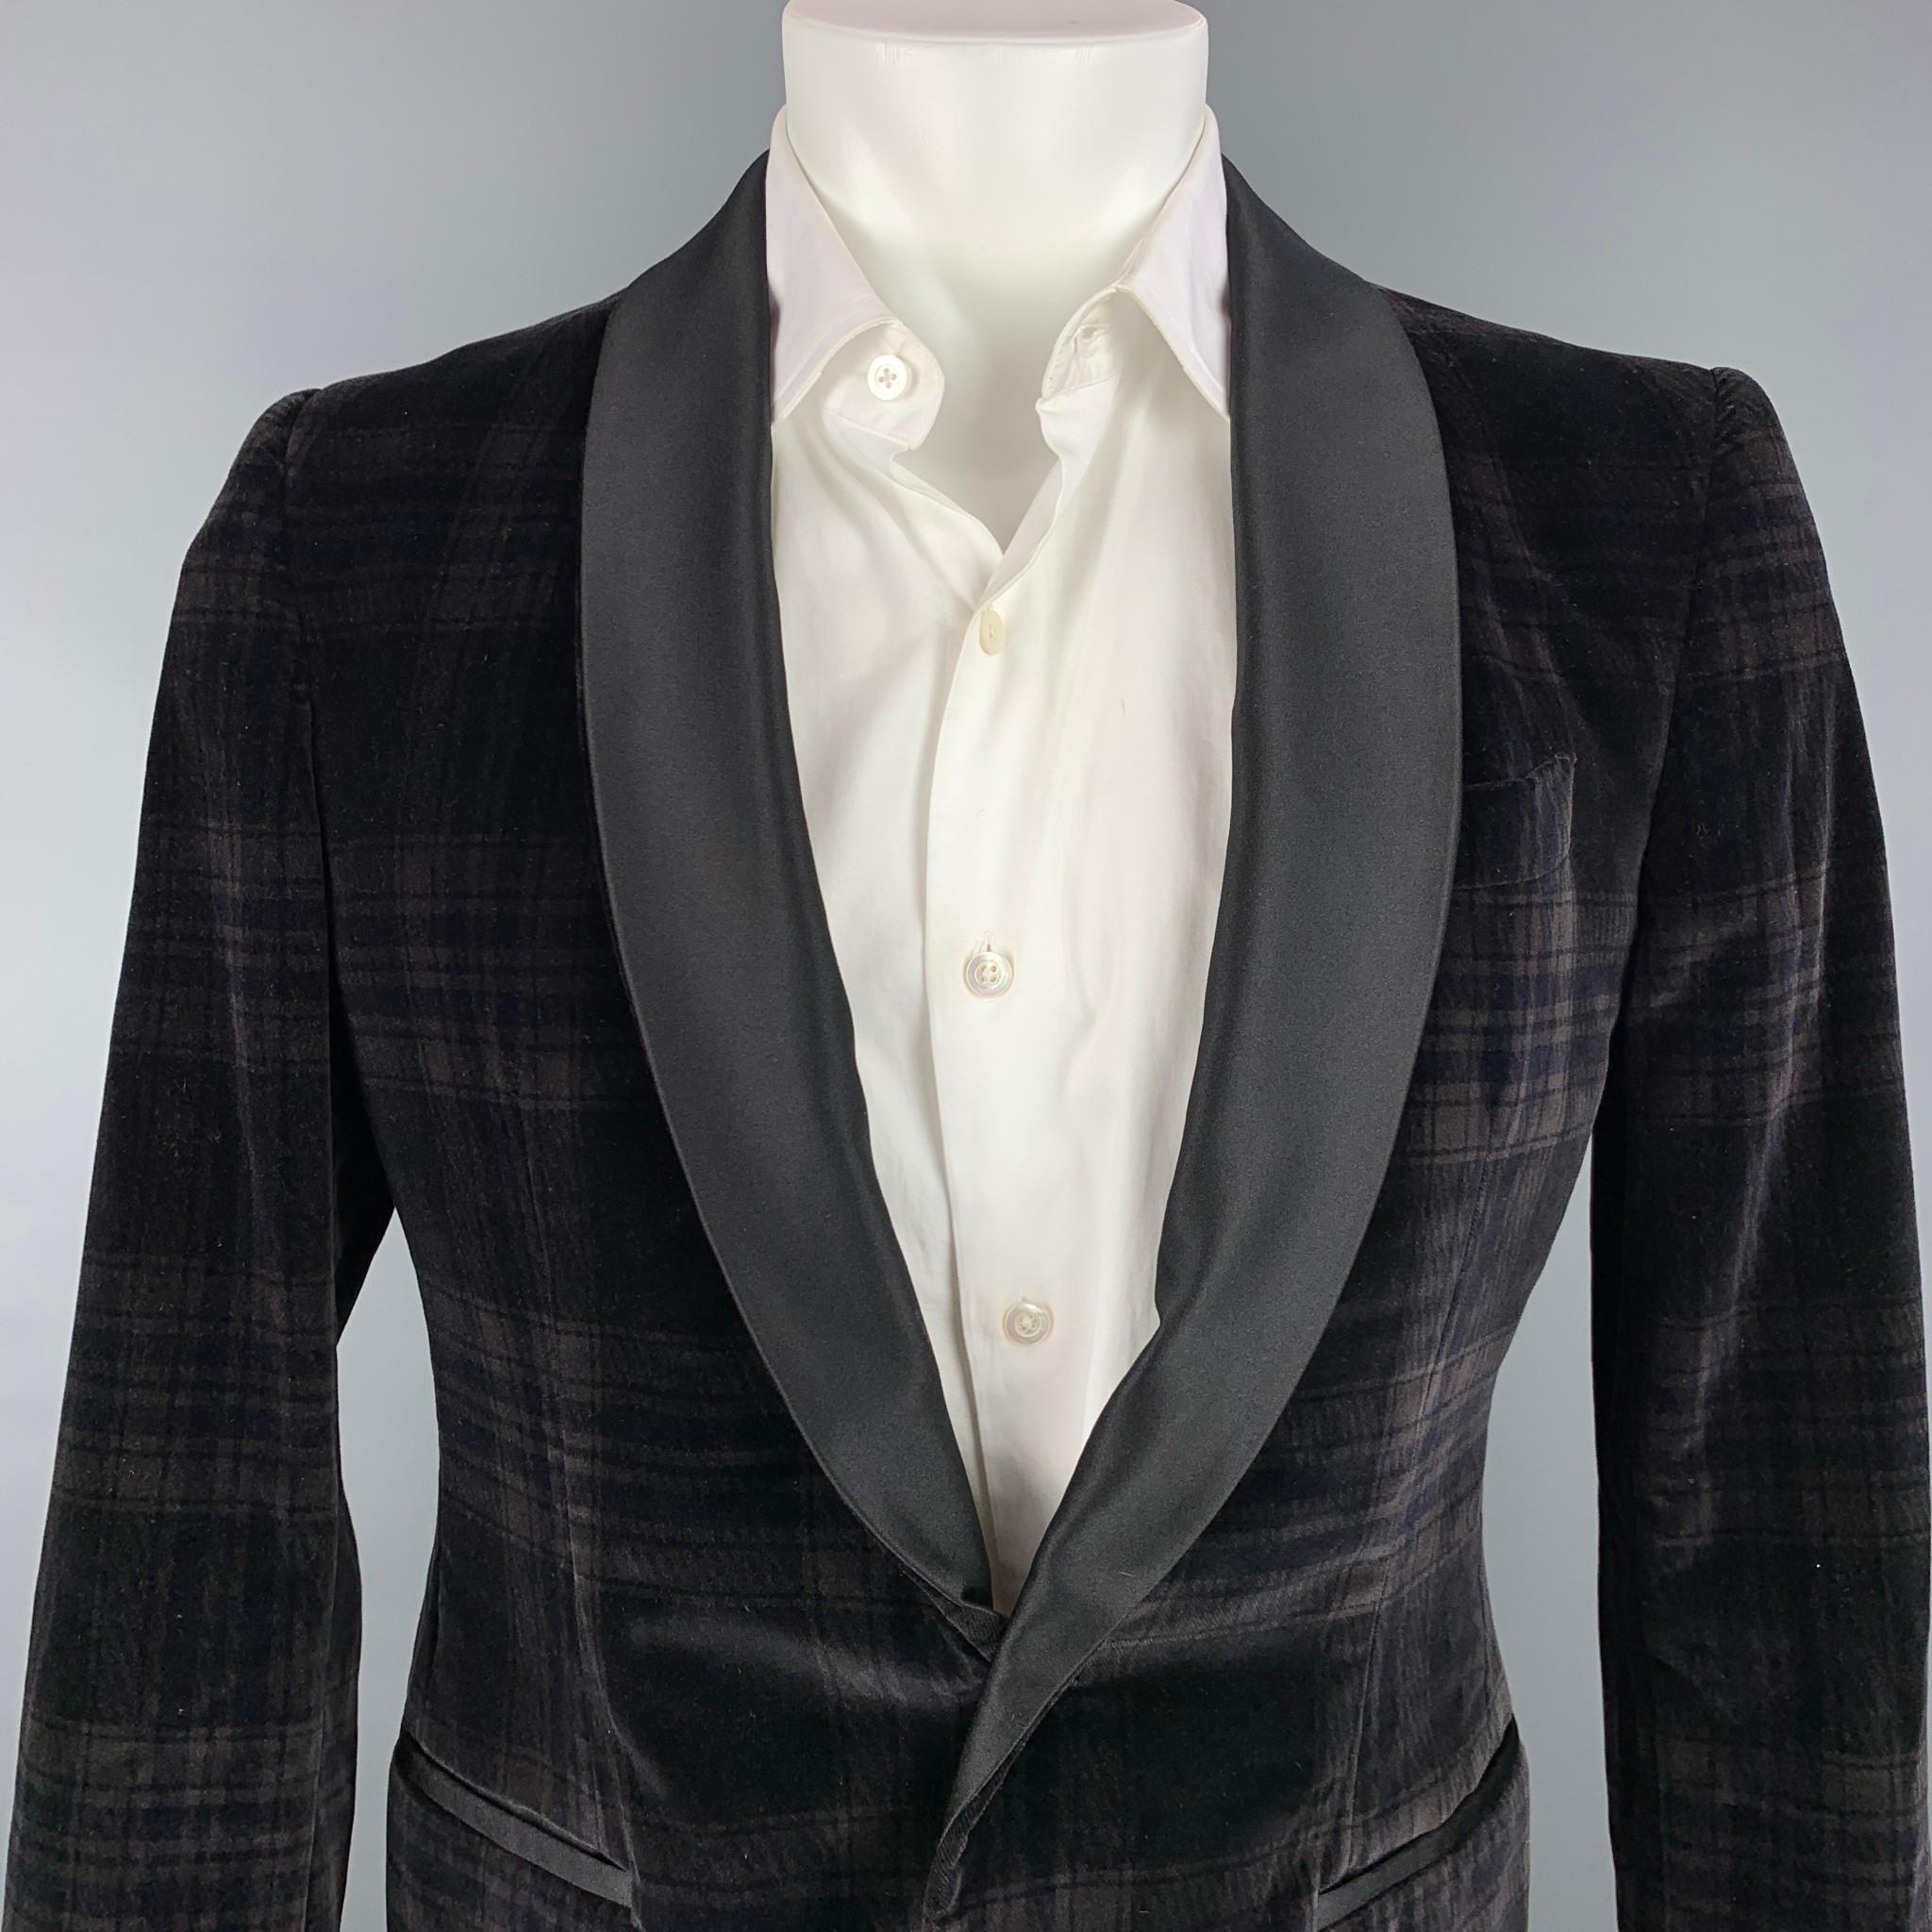 PORTS 1961 sport coat comes in a black & grey plaid velvet with a full liner featuring a shawl collar, slit pockets, and a single button closure. Made in Italy.

Very Good Pre-Owned Condition.
Marked: IT 48 R

Measurements:

Shoulder: 17 in.
Chest: